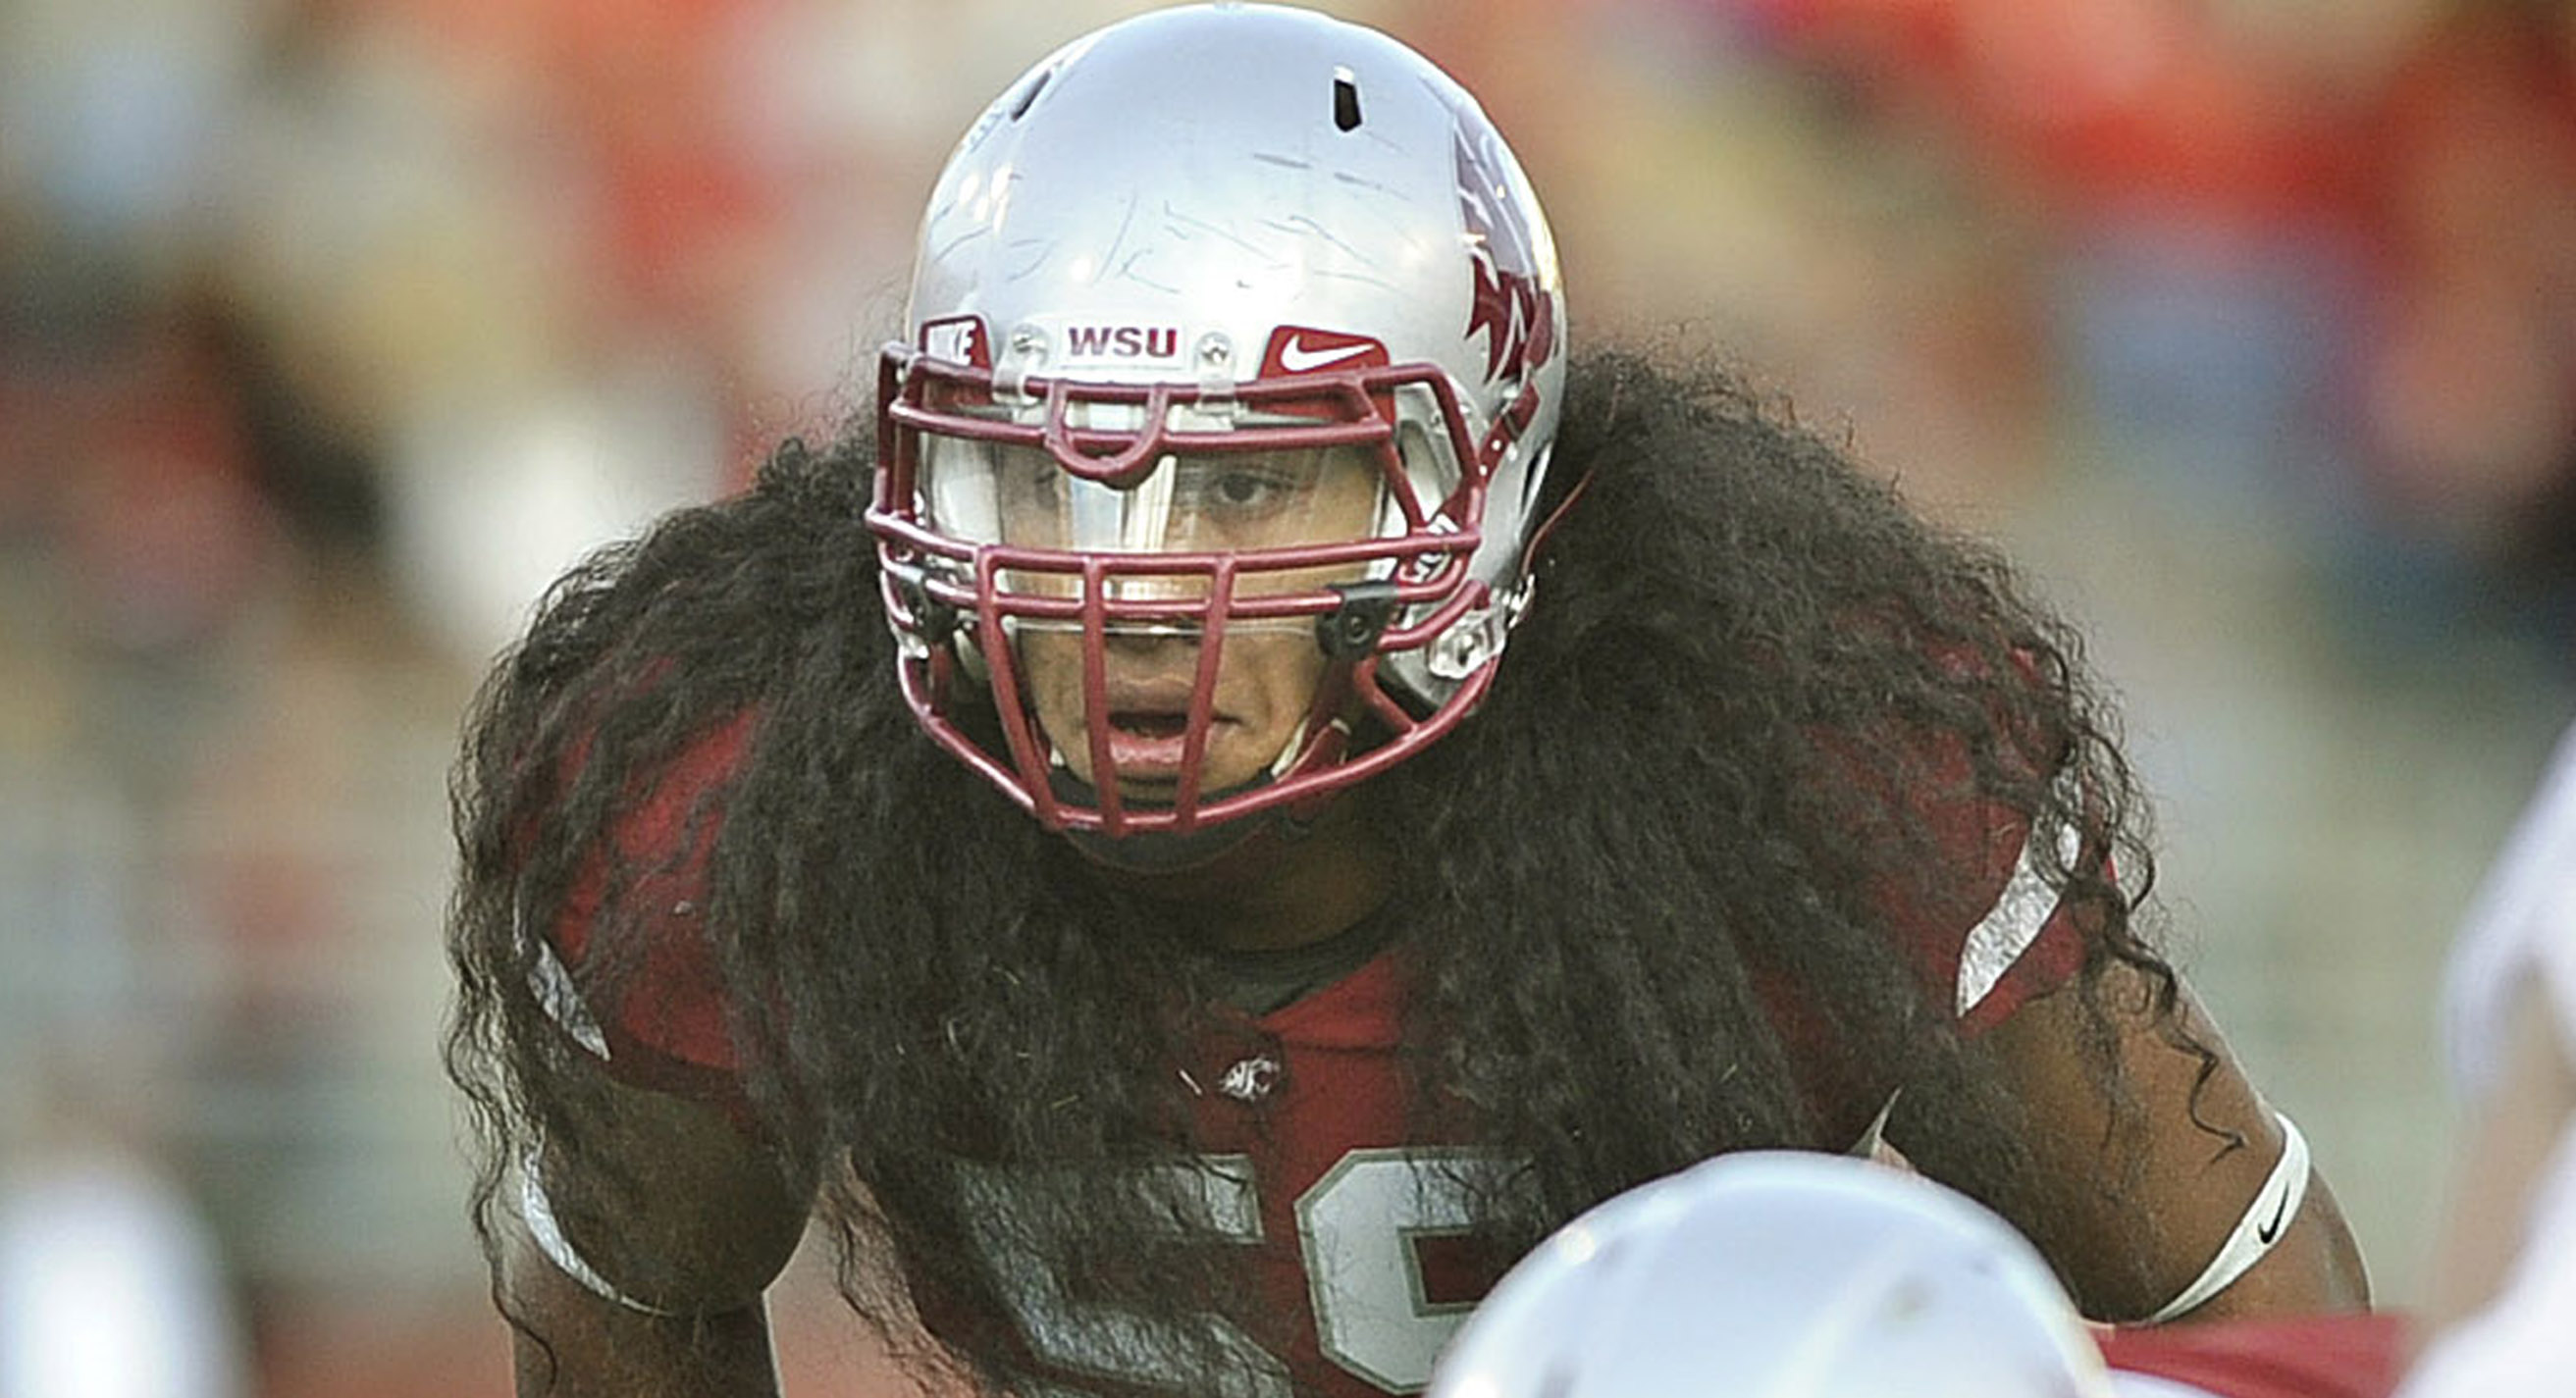 There's more to Sekope Kaufusi than hair | The Spokesman-Review2625 x 1425